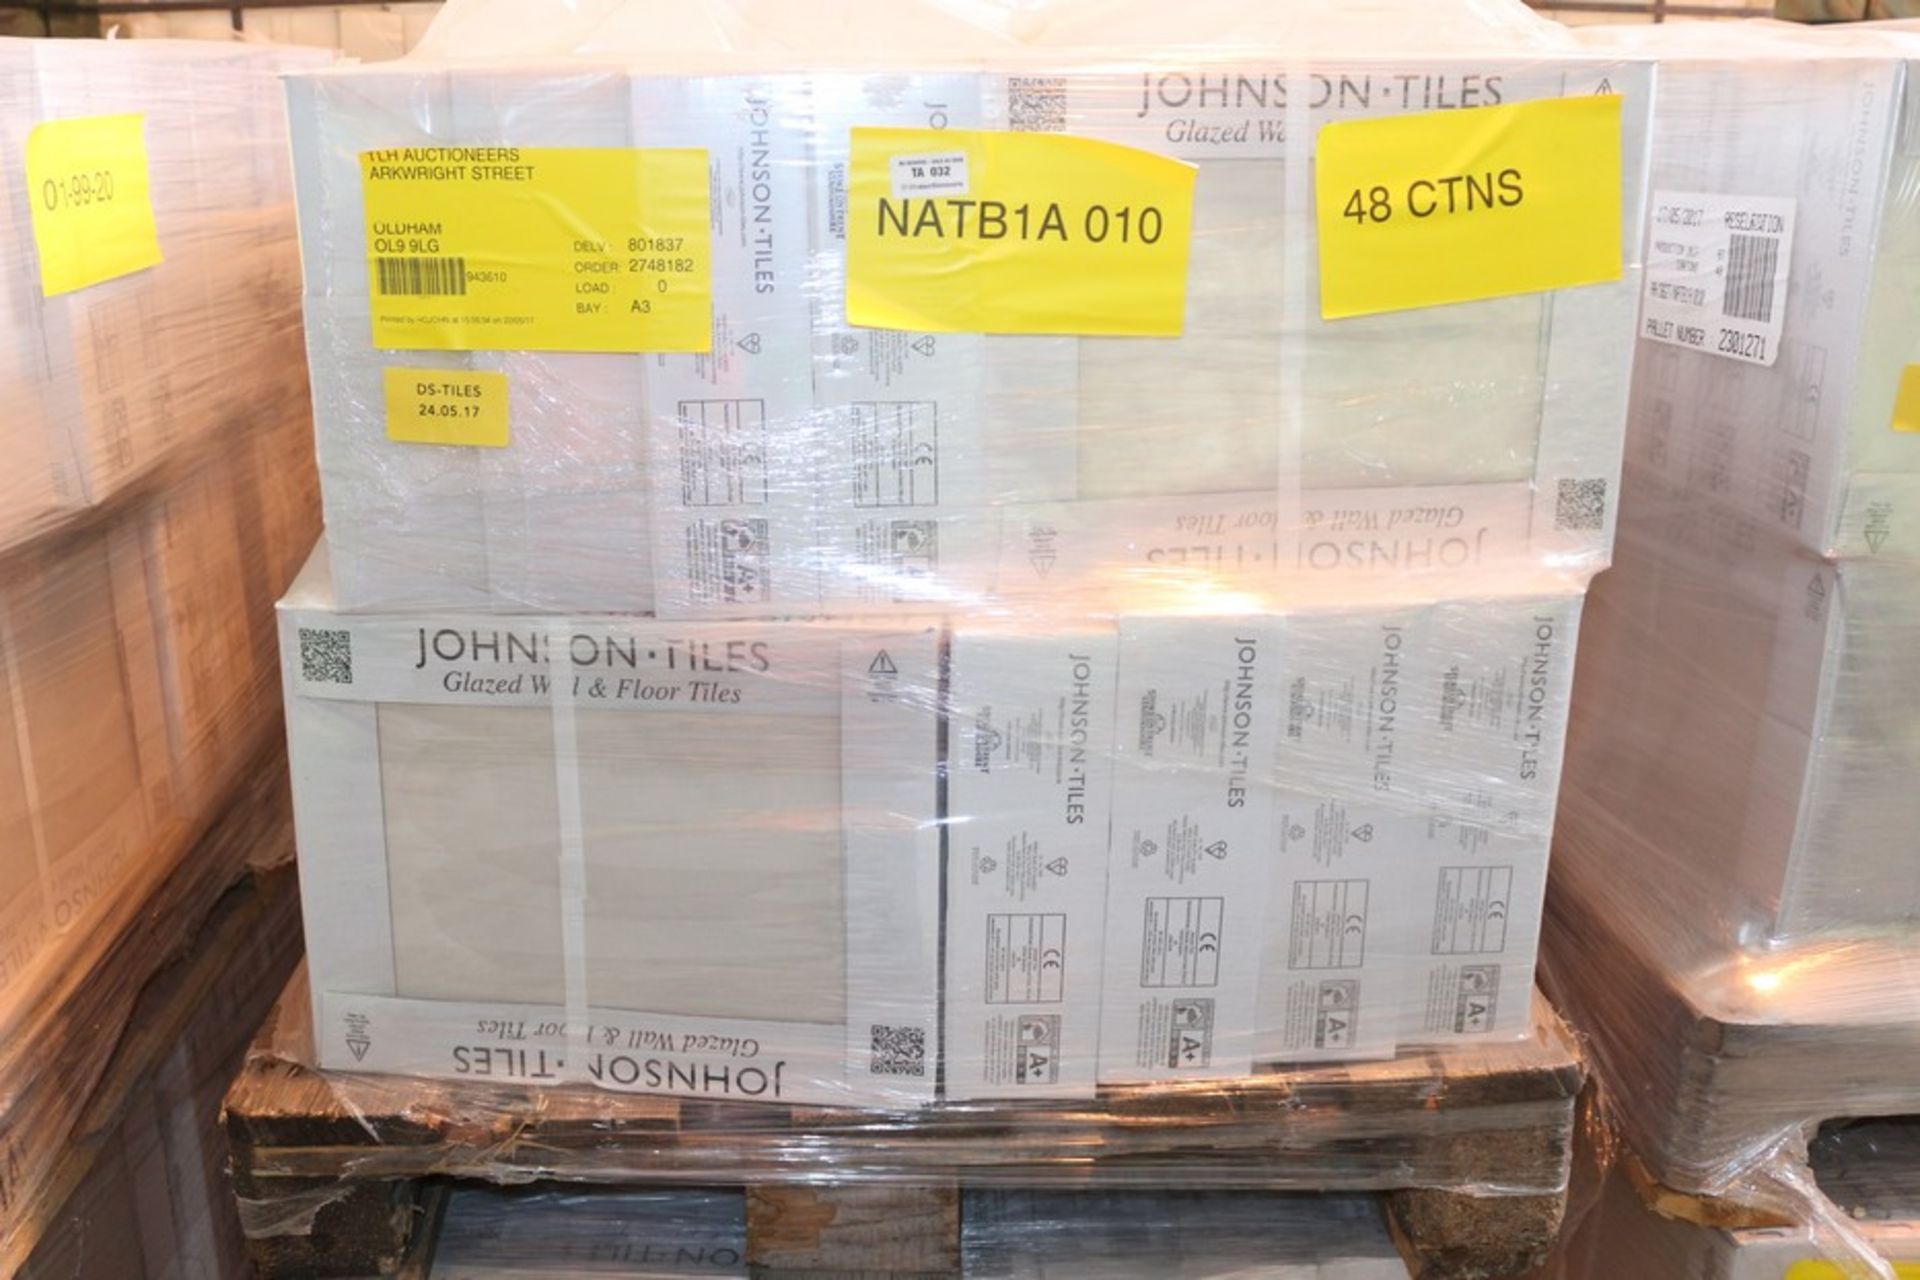 28X FACTORY SEALED BY JOHNSON TILES GLAZED FLOOR AND WALL TILES 360 X 270MM RRP £19.99 PER PACK - Image 3 of 3